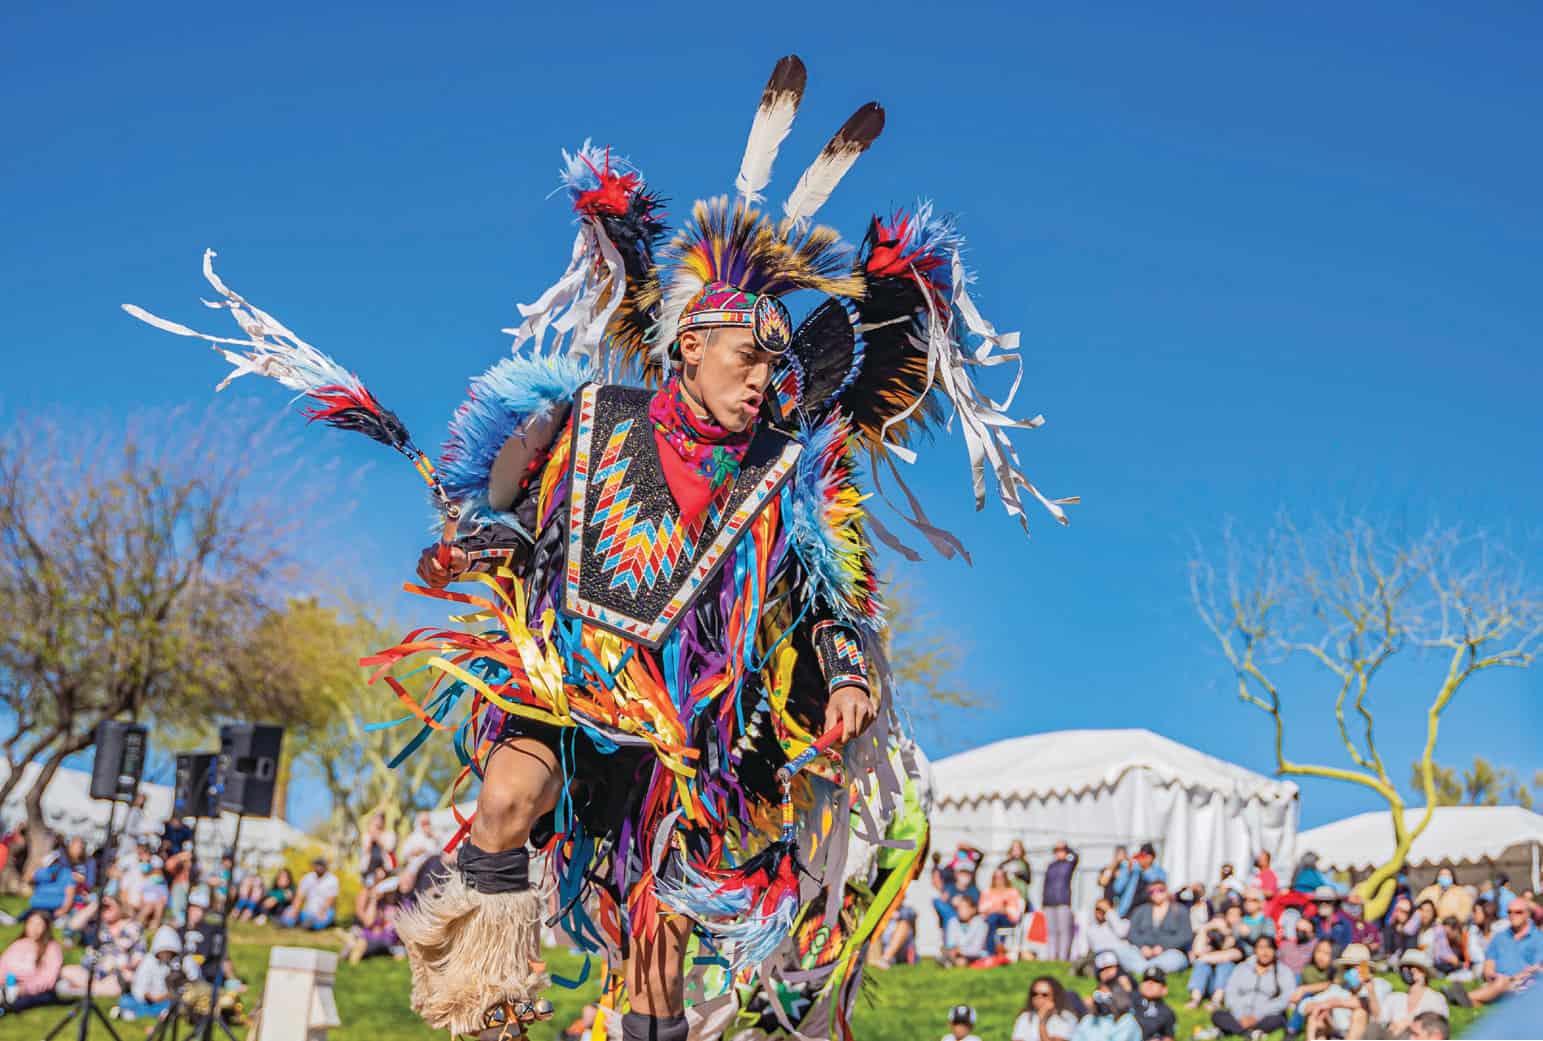 The annual Heard Museum Guild Indian Fair & Market—which showcases more than 600 Native American artists and draws thousands of visitors—is held on the Heard Museum campus.